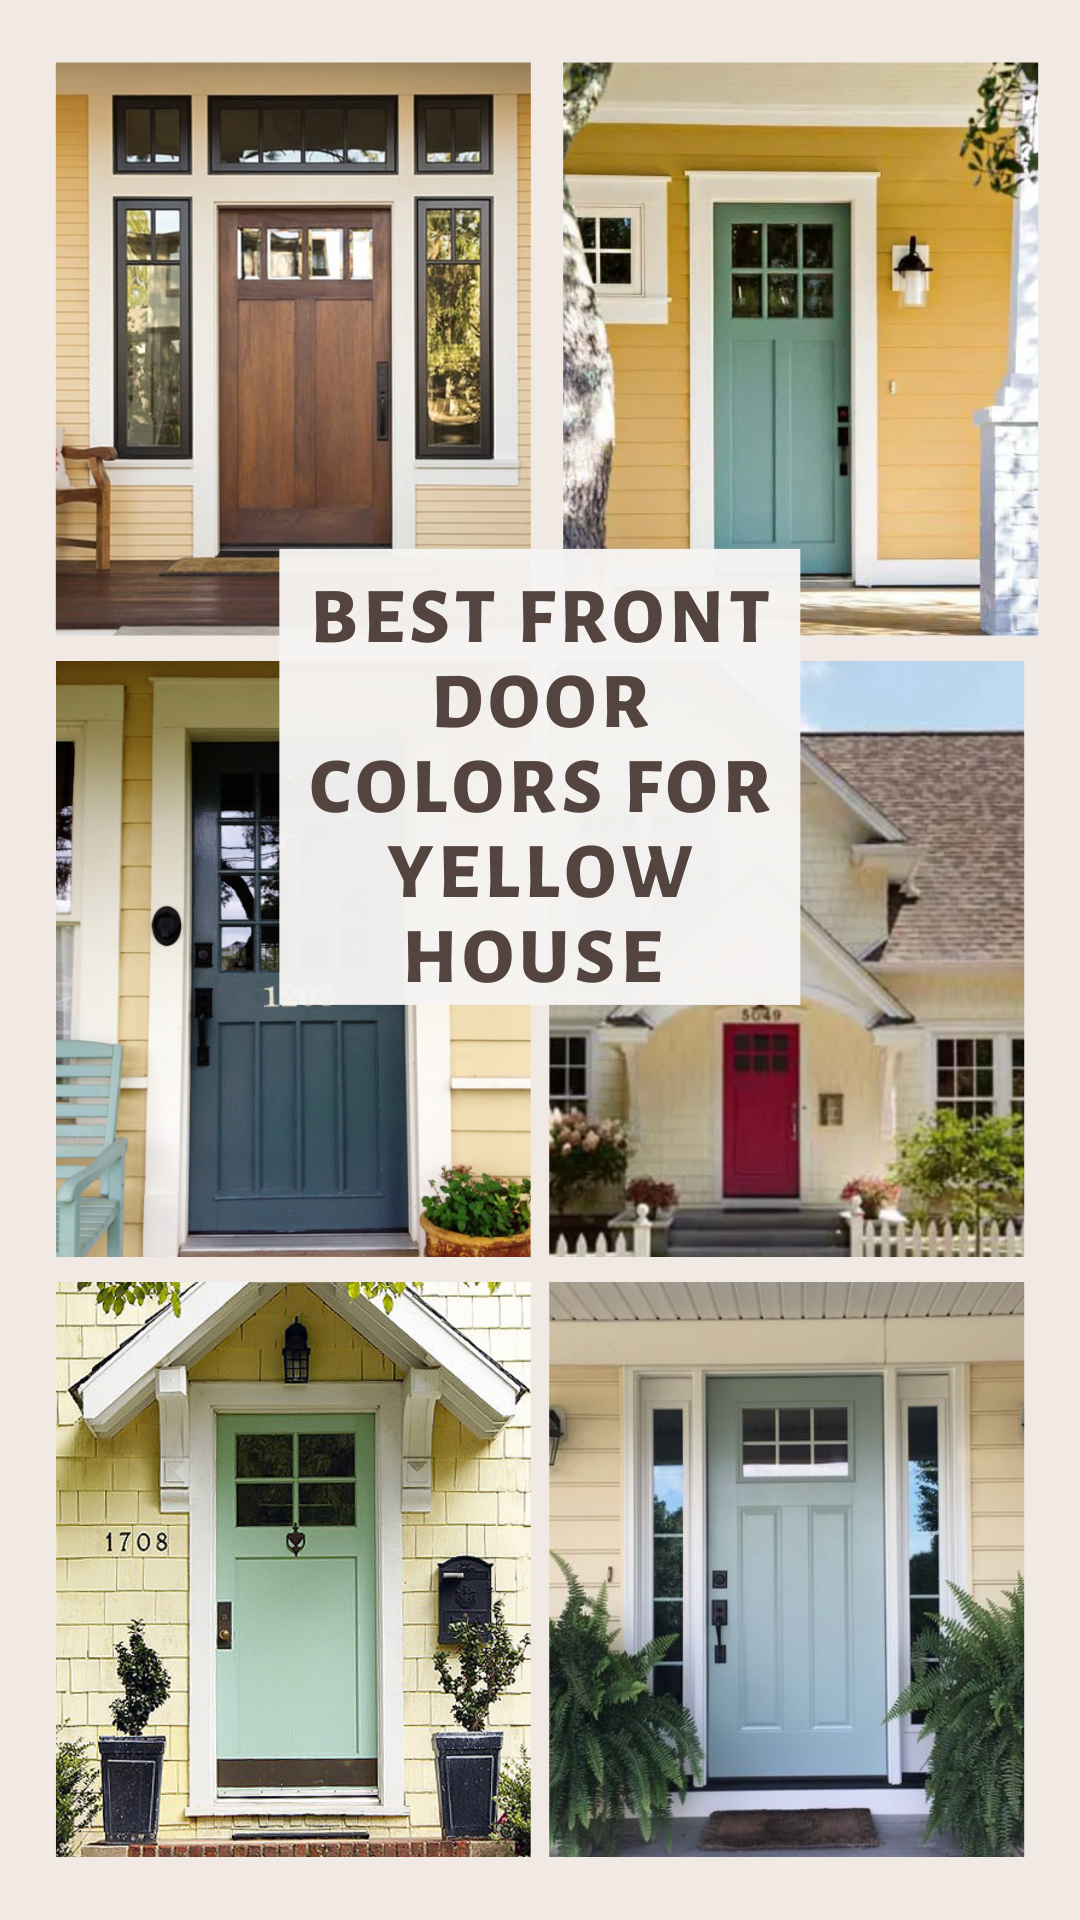 Most Welcoming Front Door Colors for a Yellow House